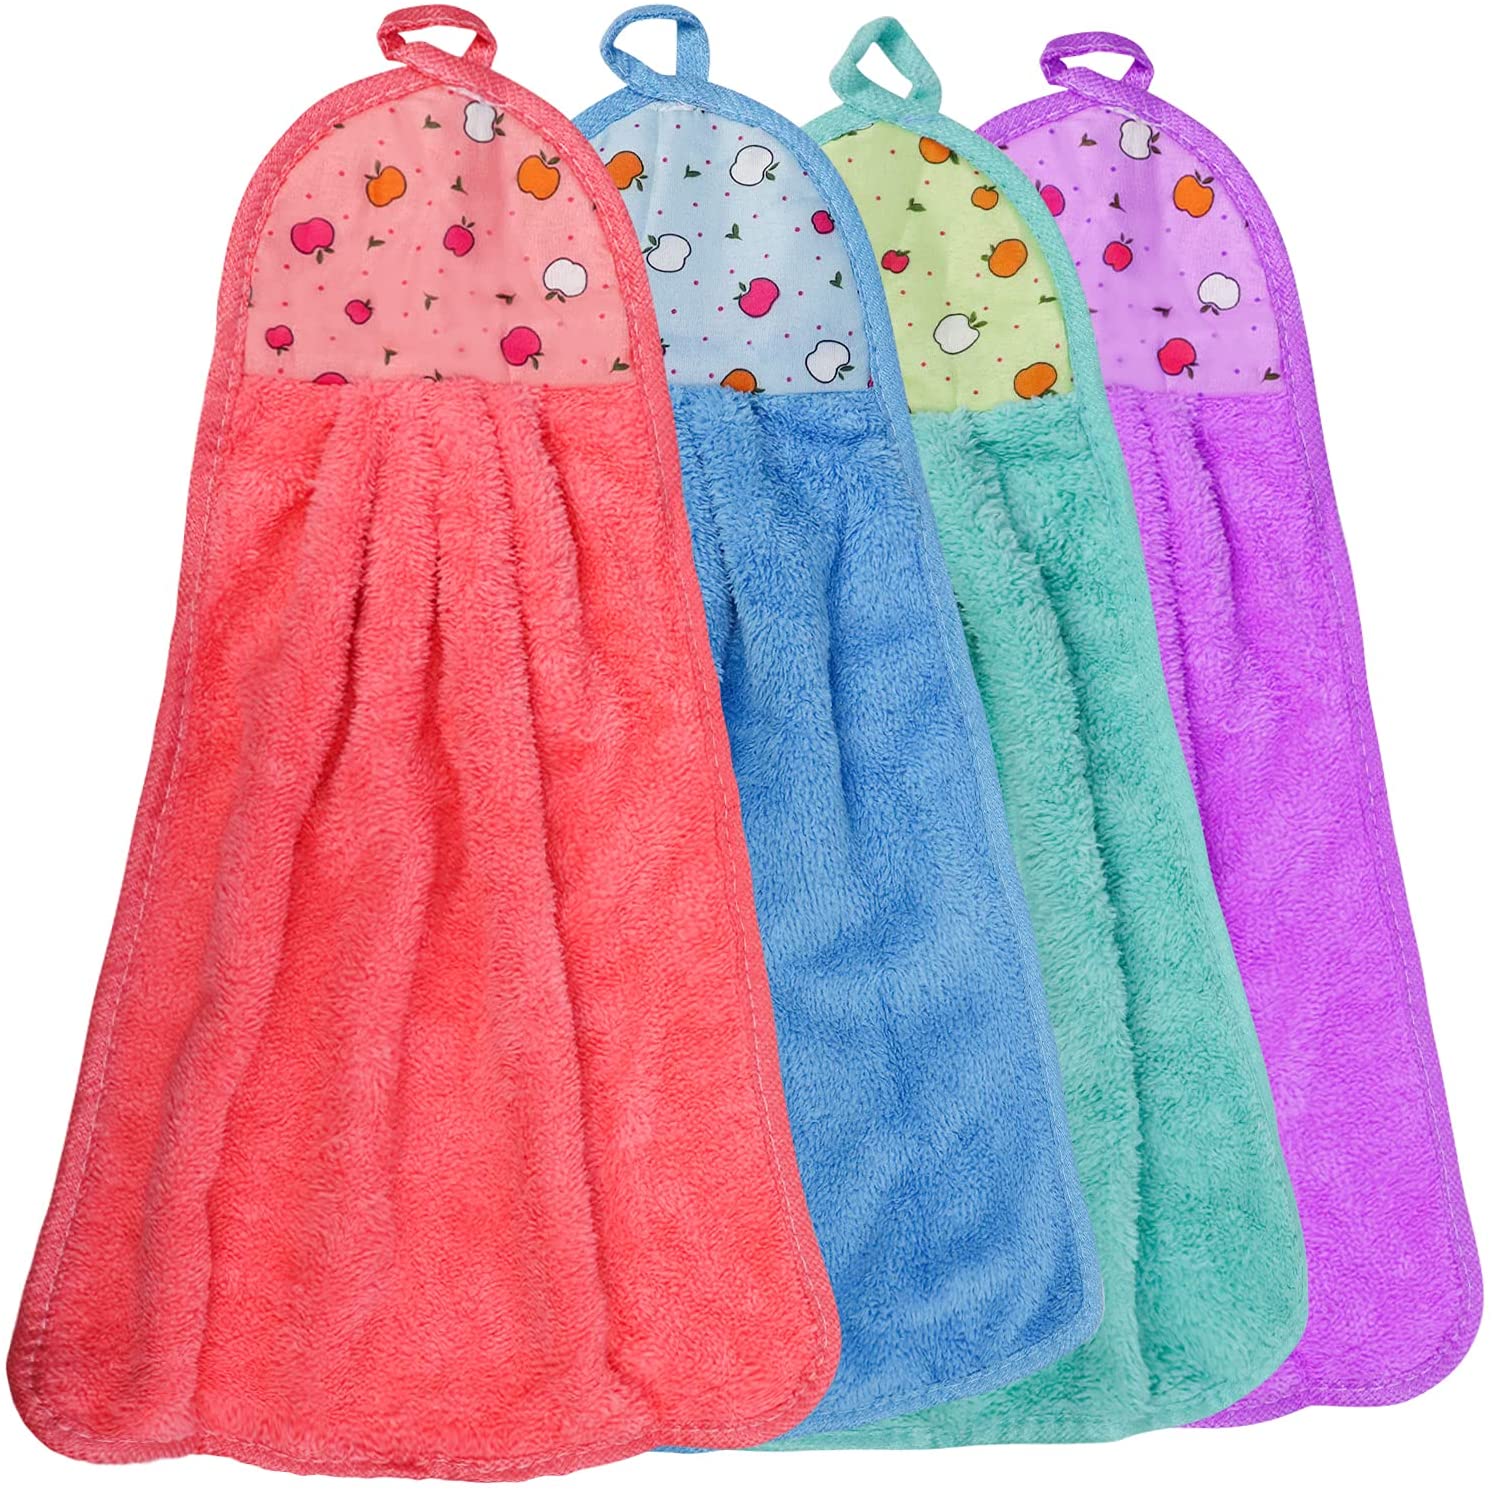 Pack of 4 Pcs - kitchen hand towel quality cotton wash decorative holder  bamboo soft embroidery bedding set decorated towels babies bathroom of